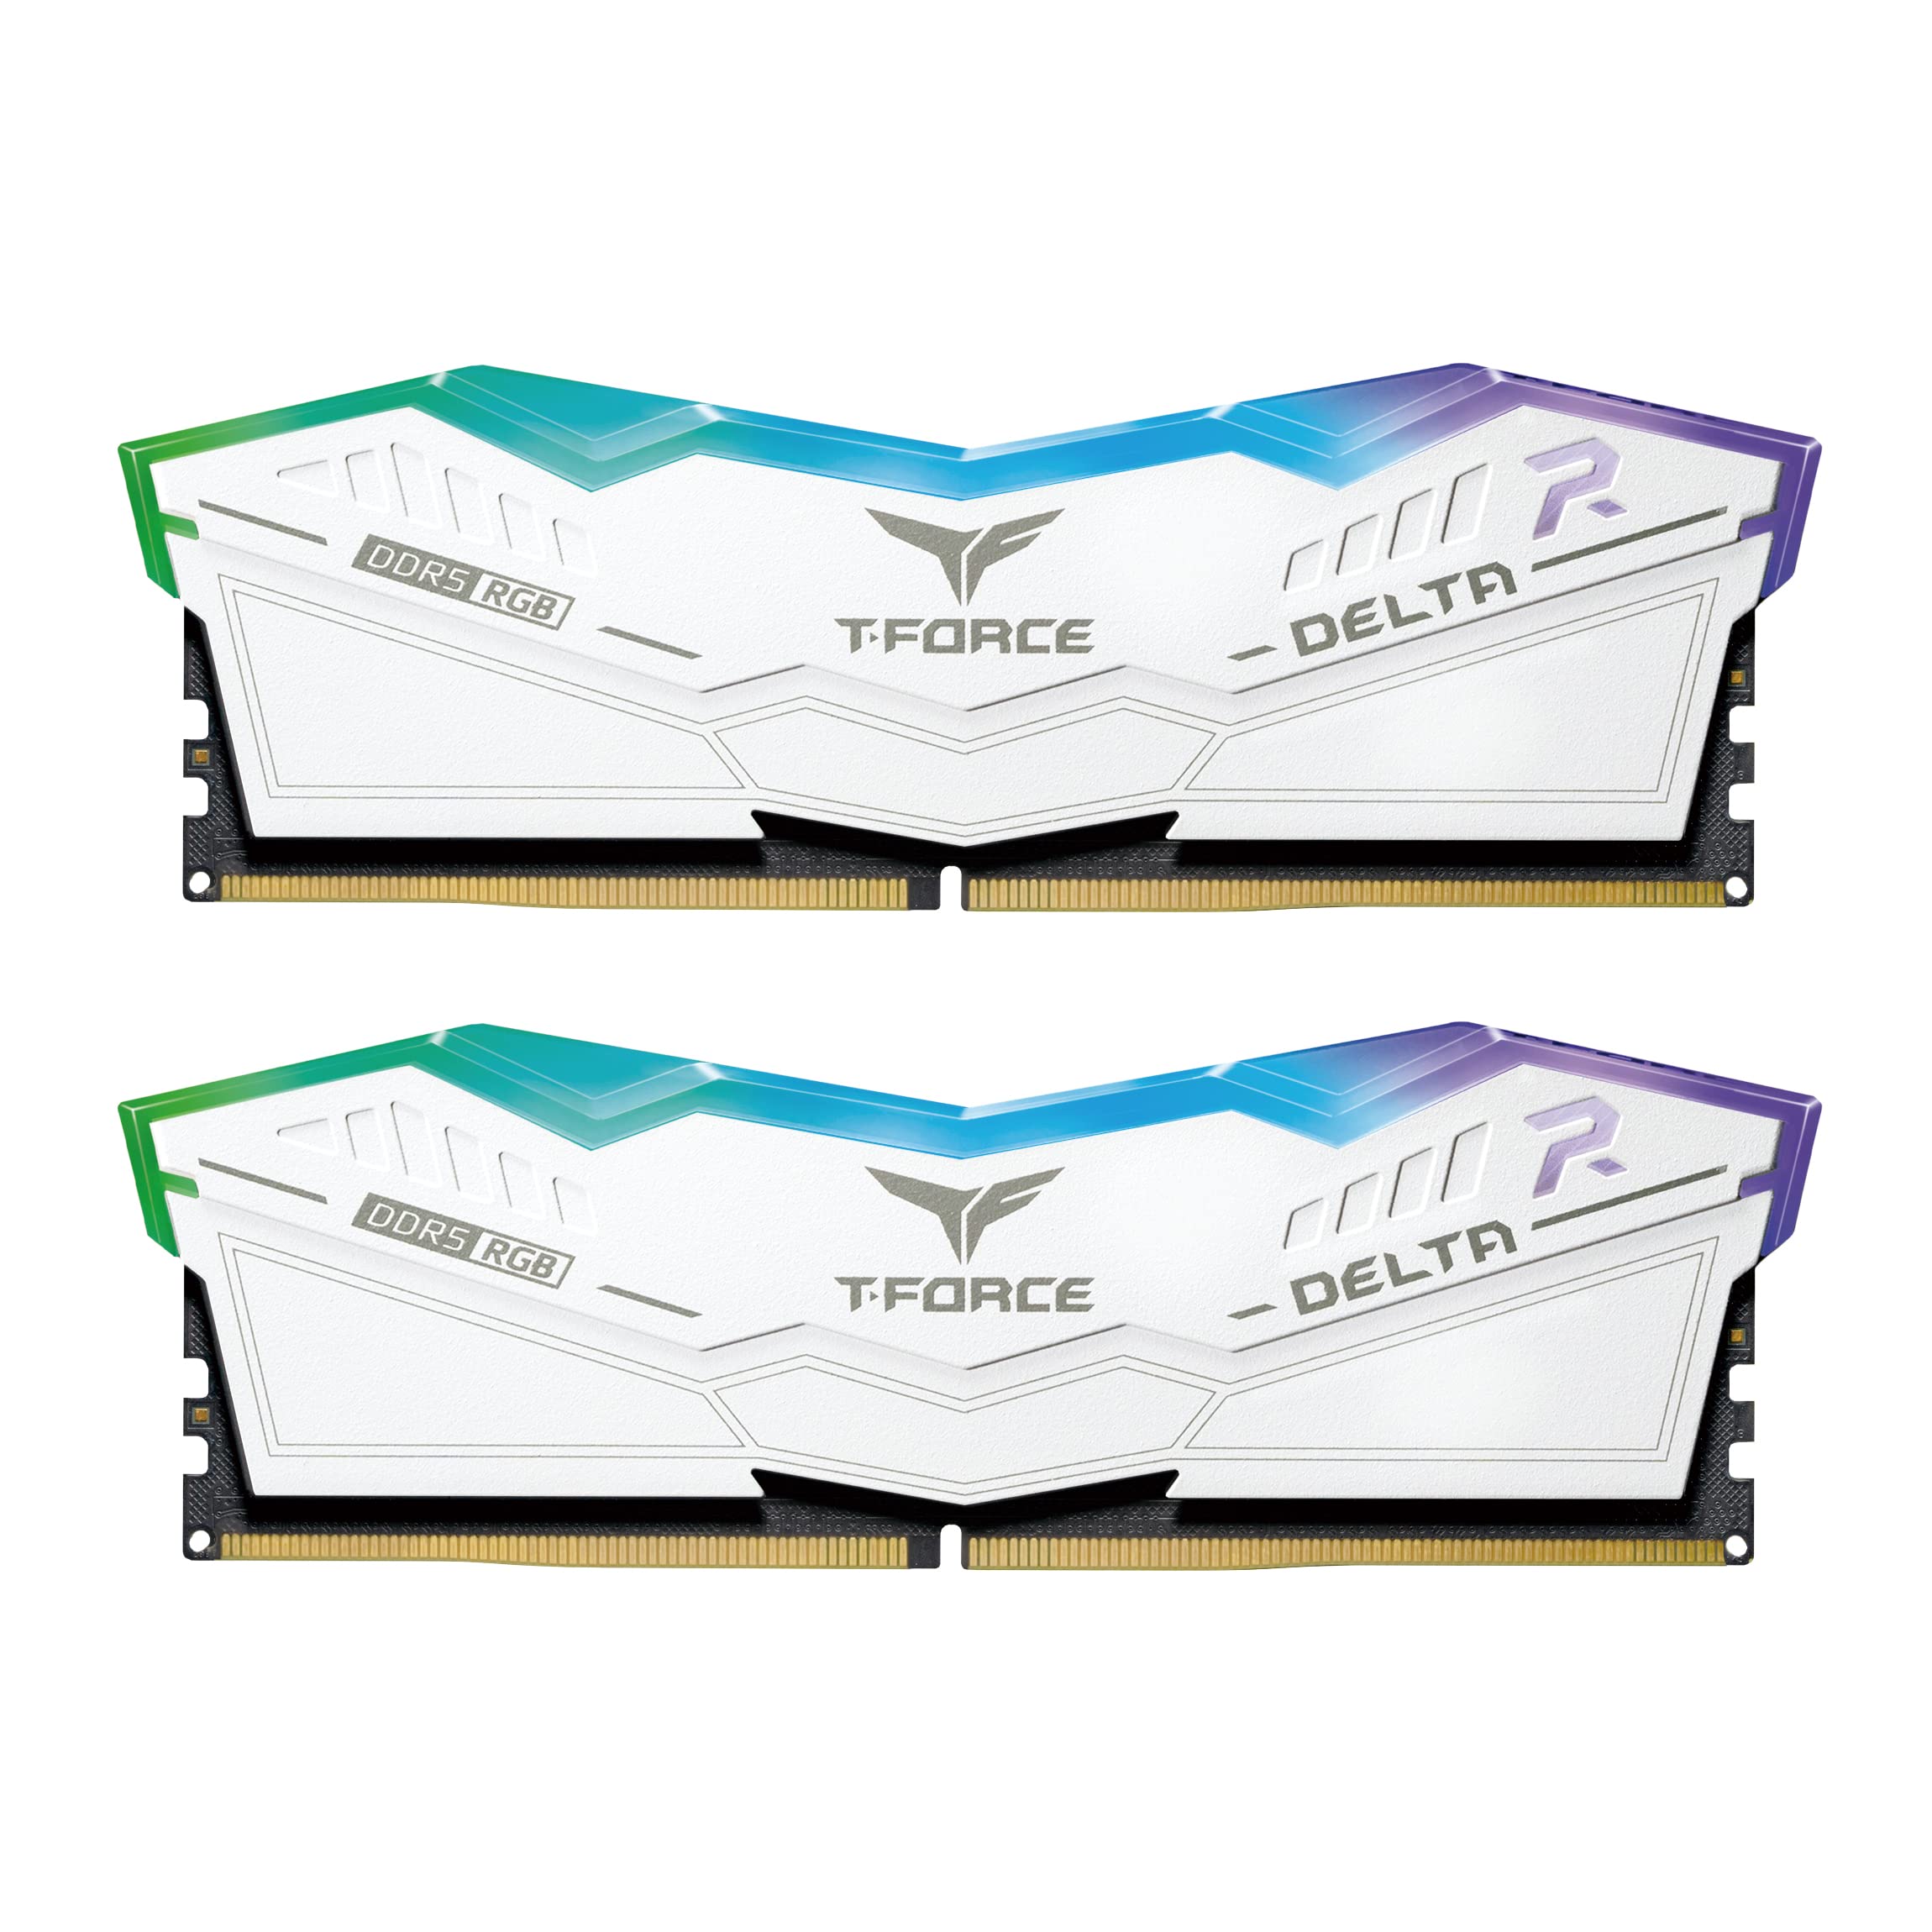 TEAMGROUP T-Force Delta RGB DDR5 Ram 32GB キット 2x16GB 6000MHz PC5-48000 CL30 デスクトップメモリーモジュ